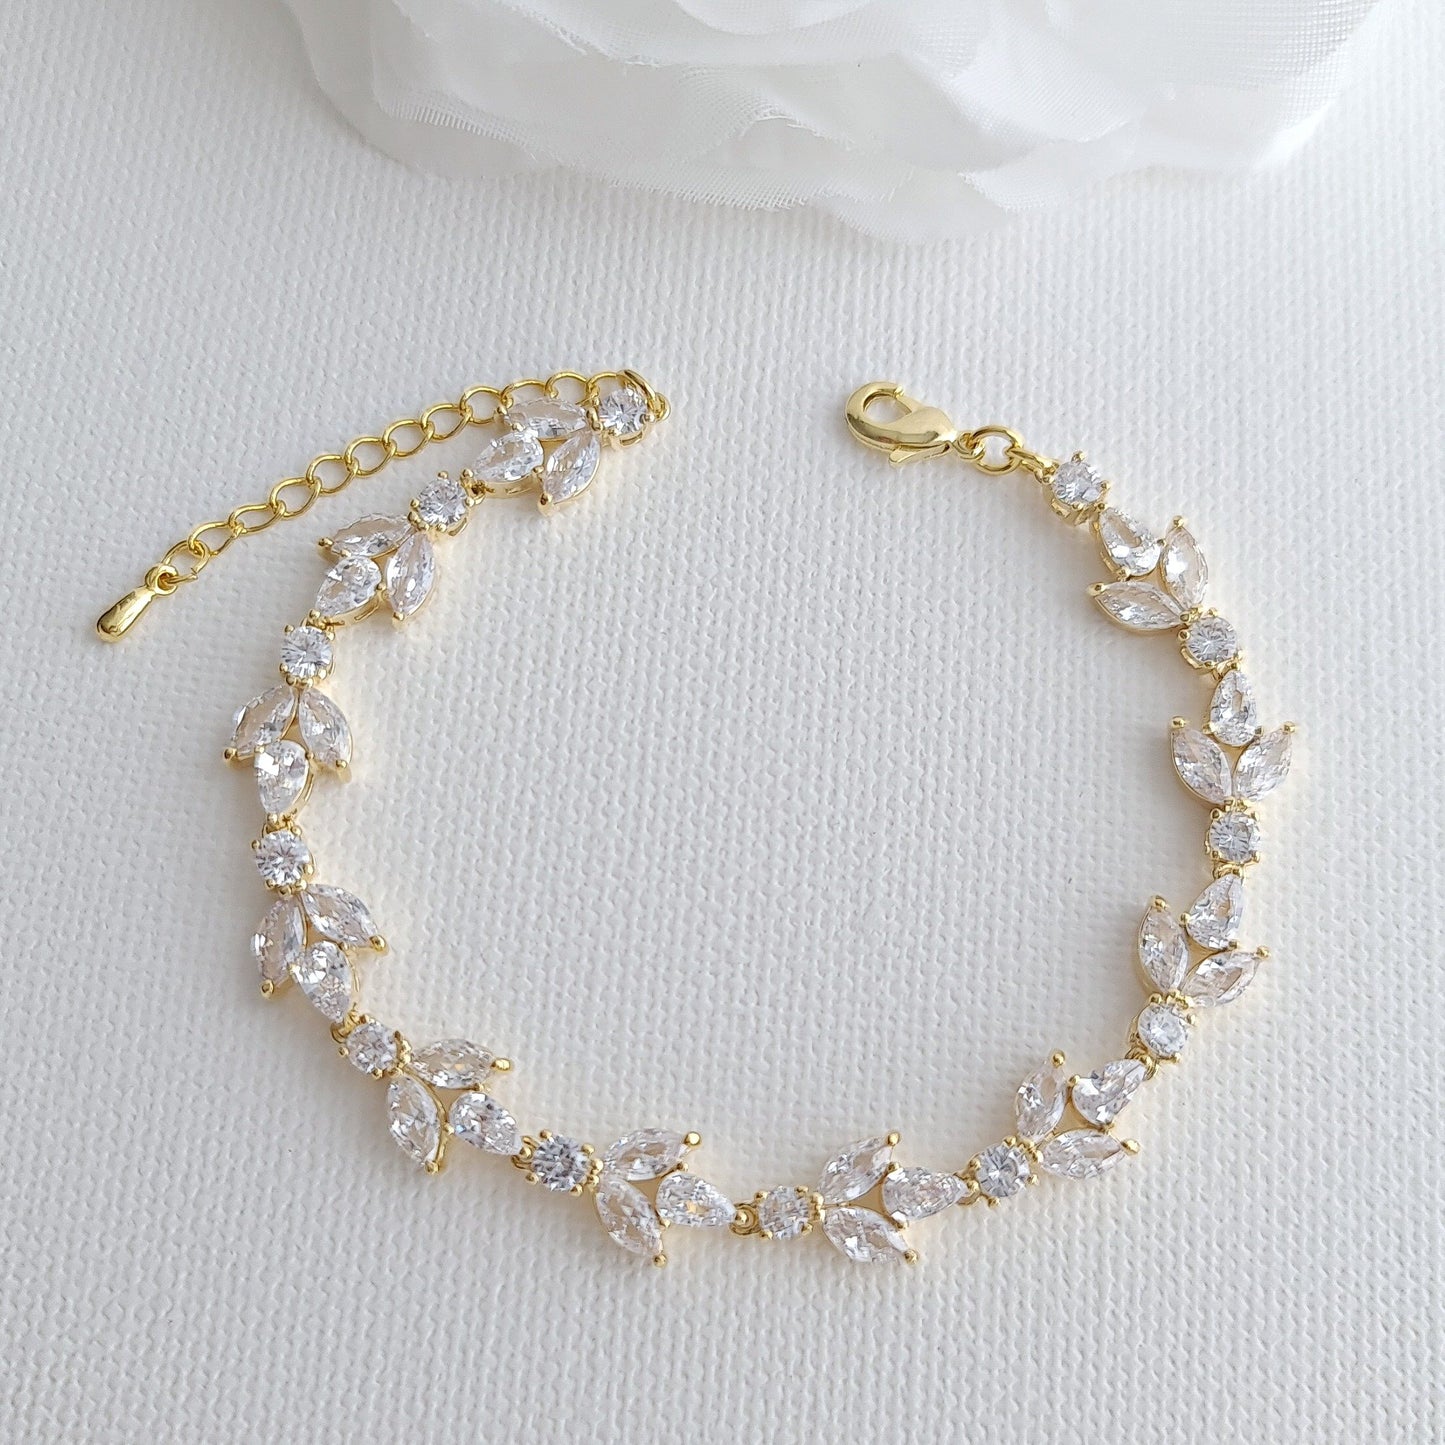 Bracelet for the Bride in gold and cubic zirconia- Poetry Designs